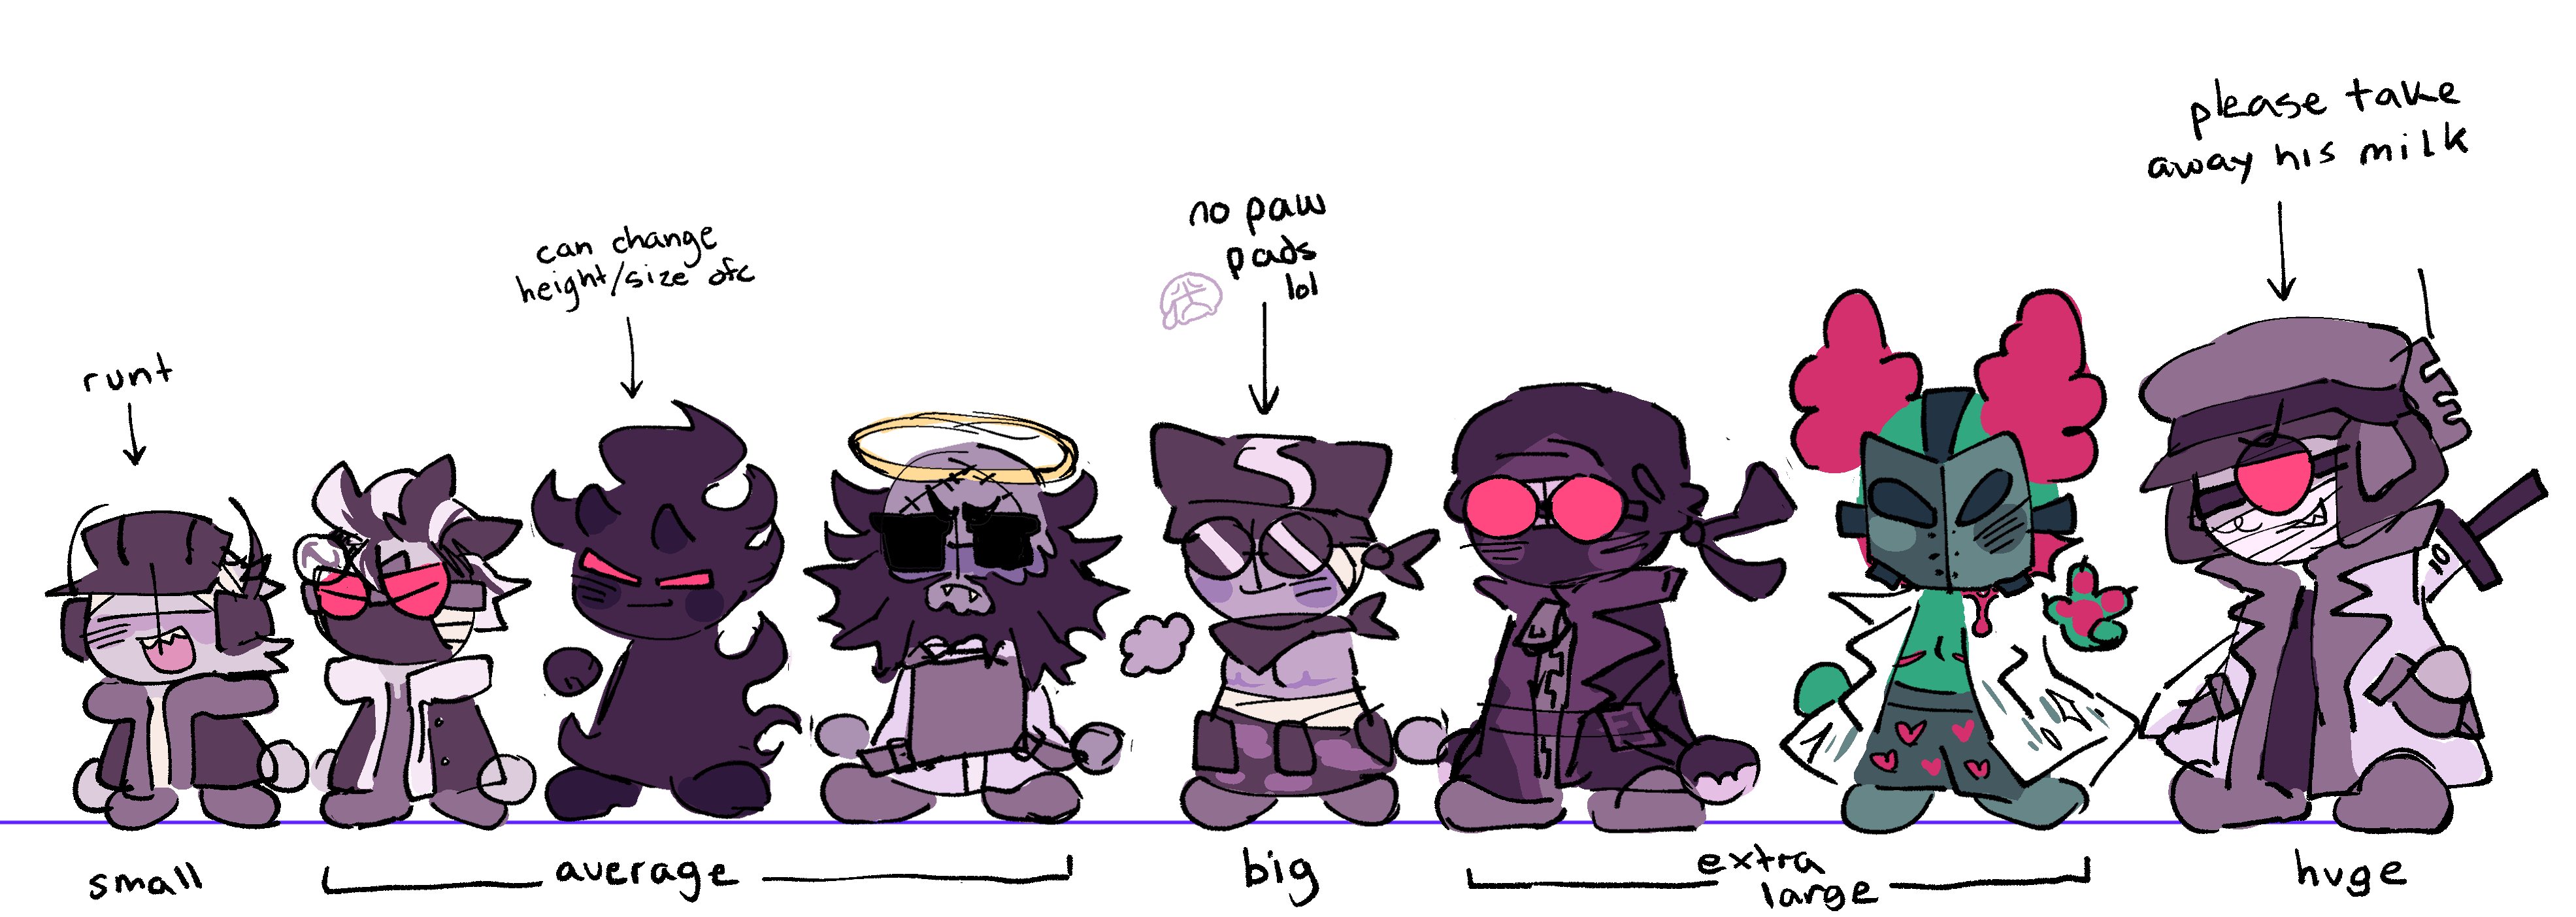 Madness combat characters sizes from shortest to tallest if they existed  irl ( just my opinion) : r/madnesscombat